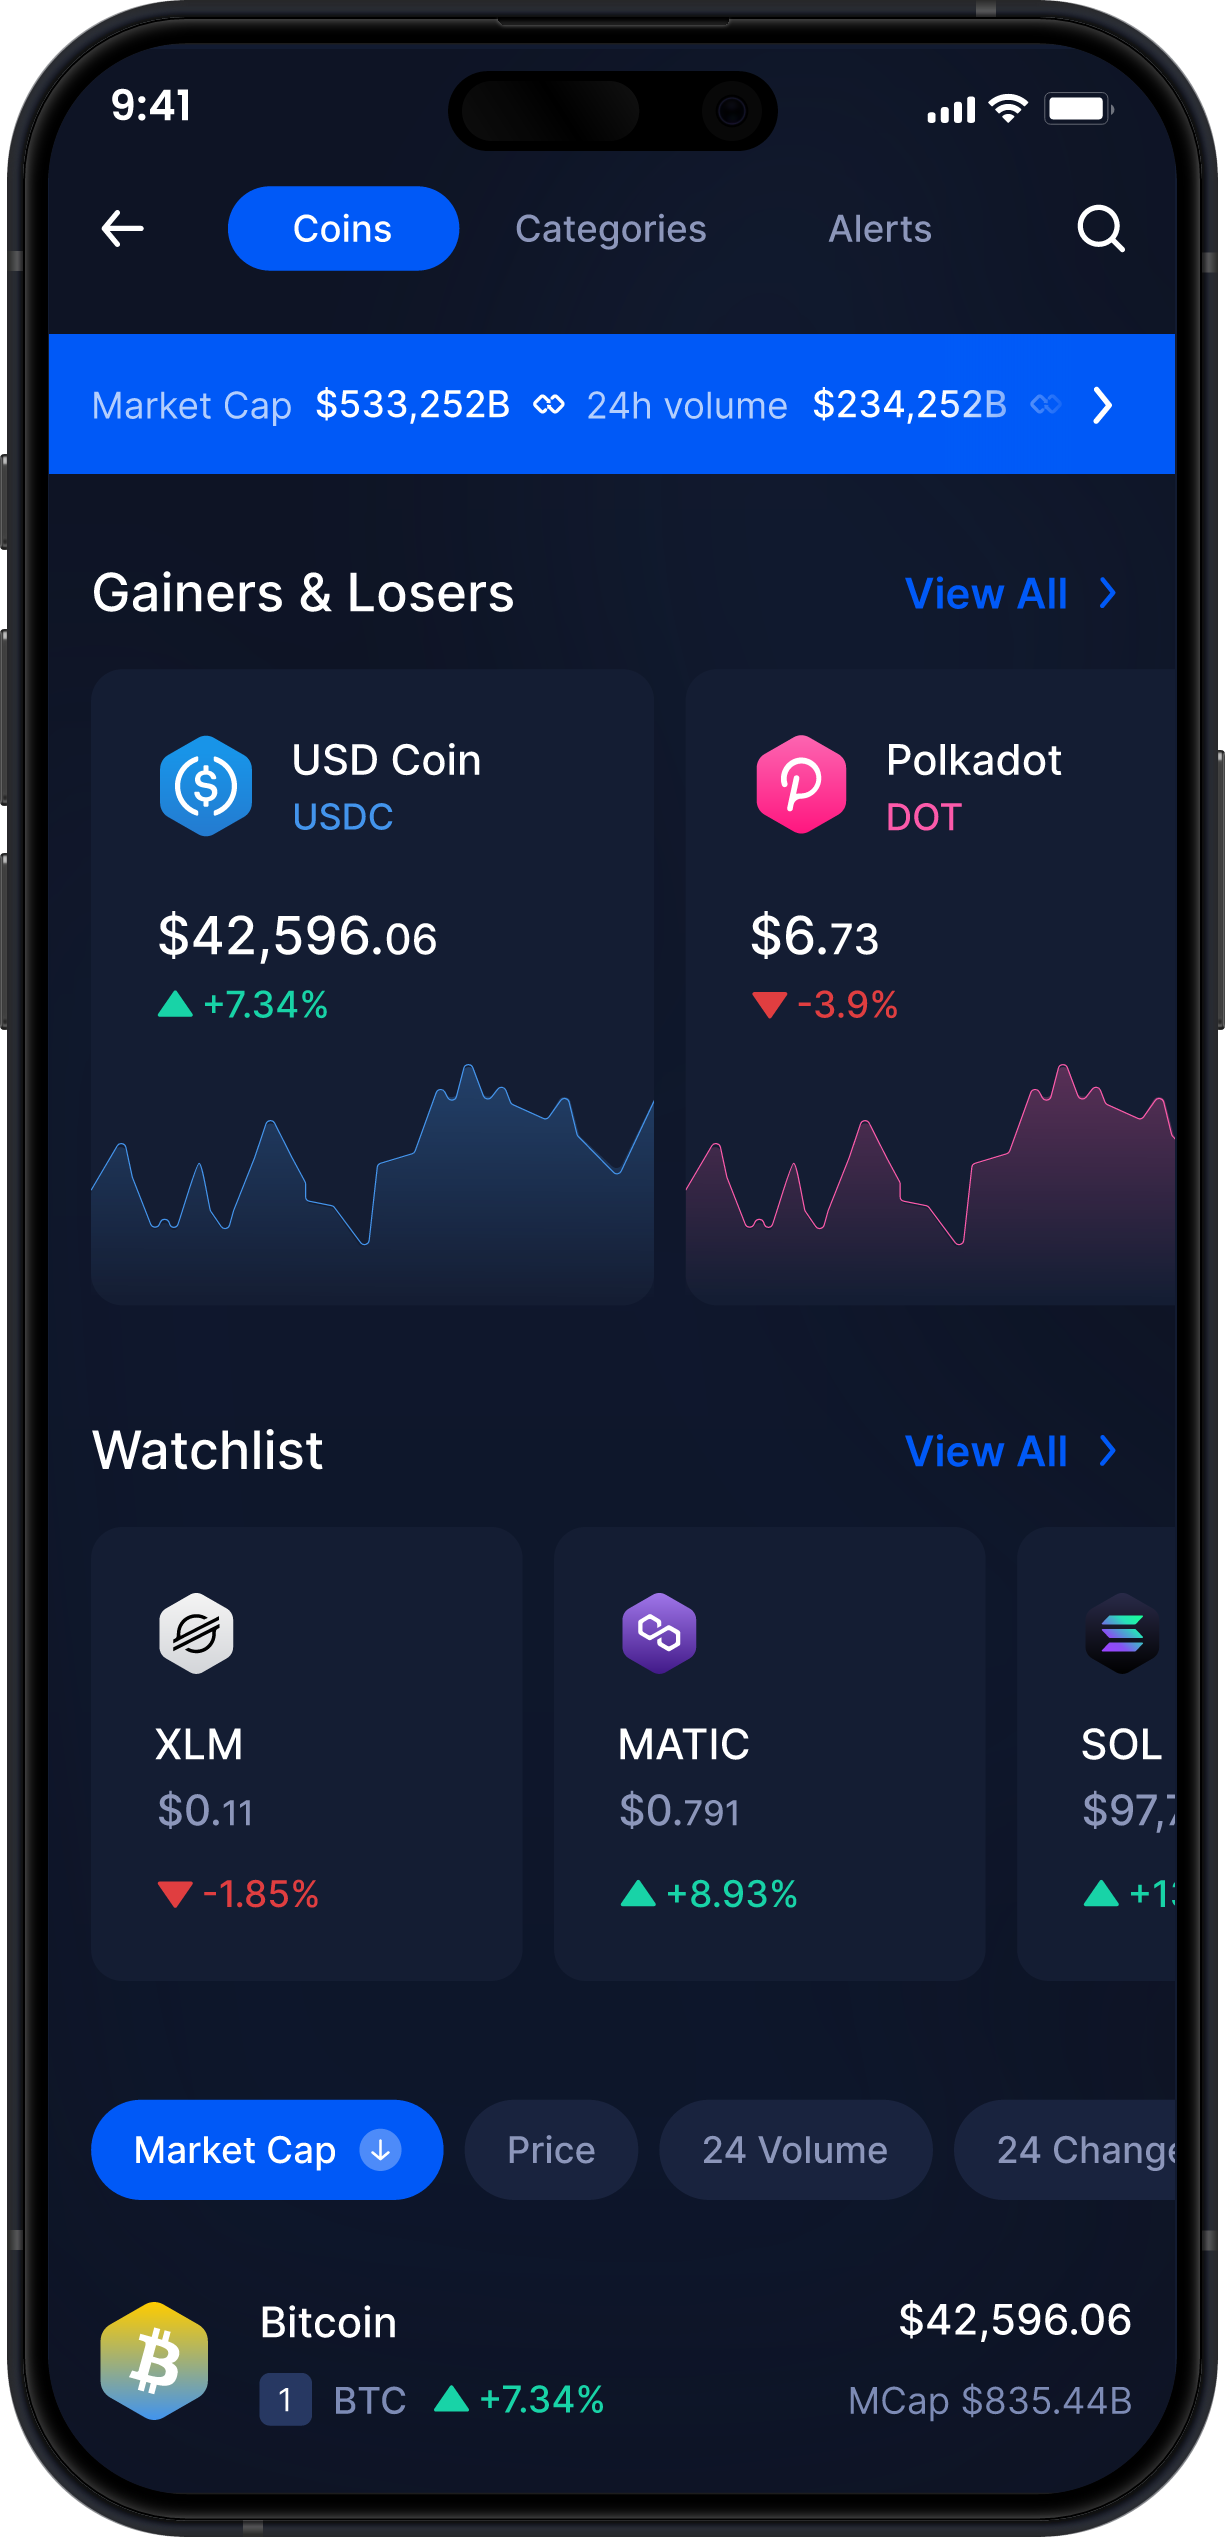 Infinity Mobile USD Coin Wallet - USDC Market Stats & Tracker